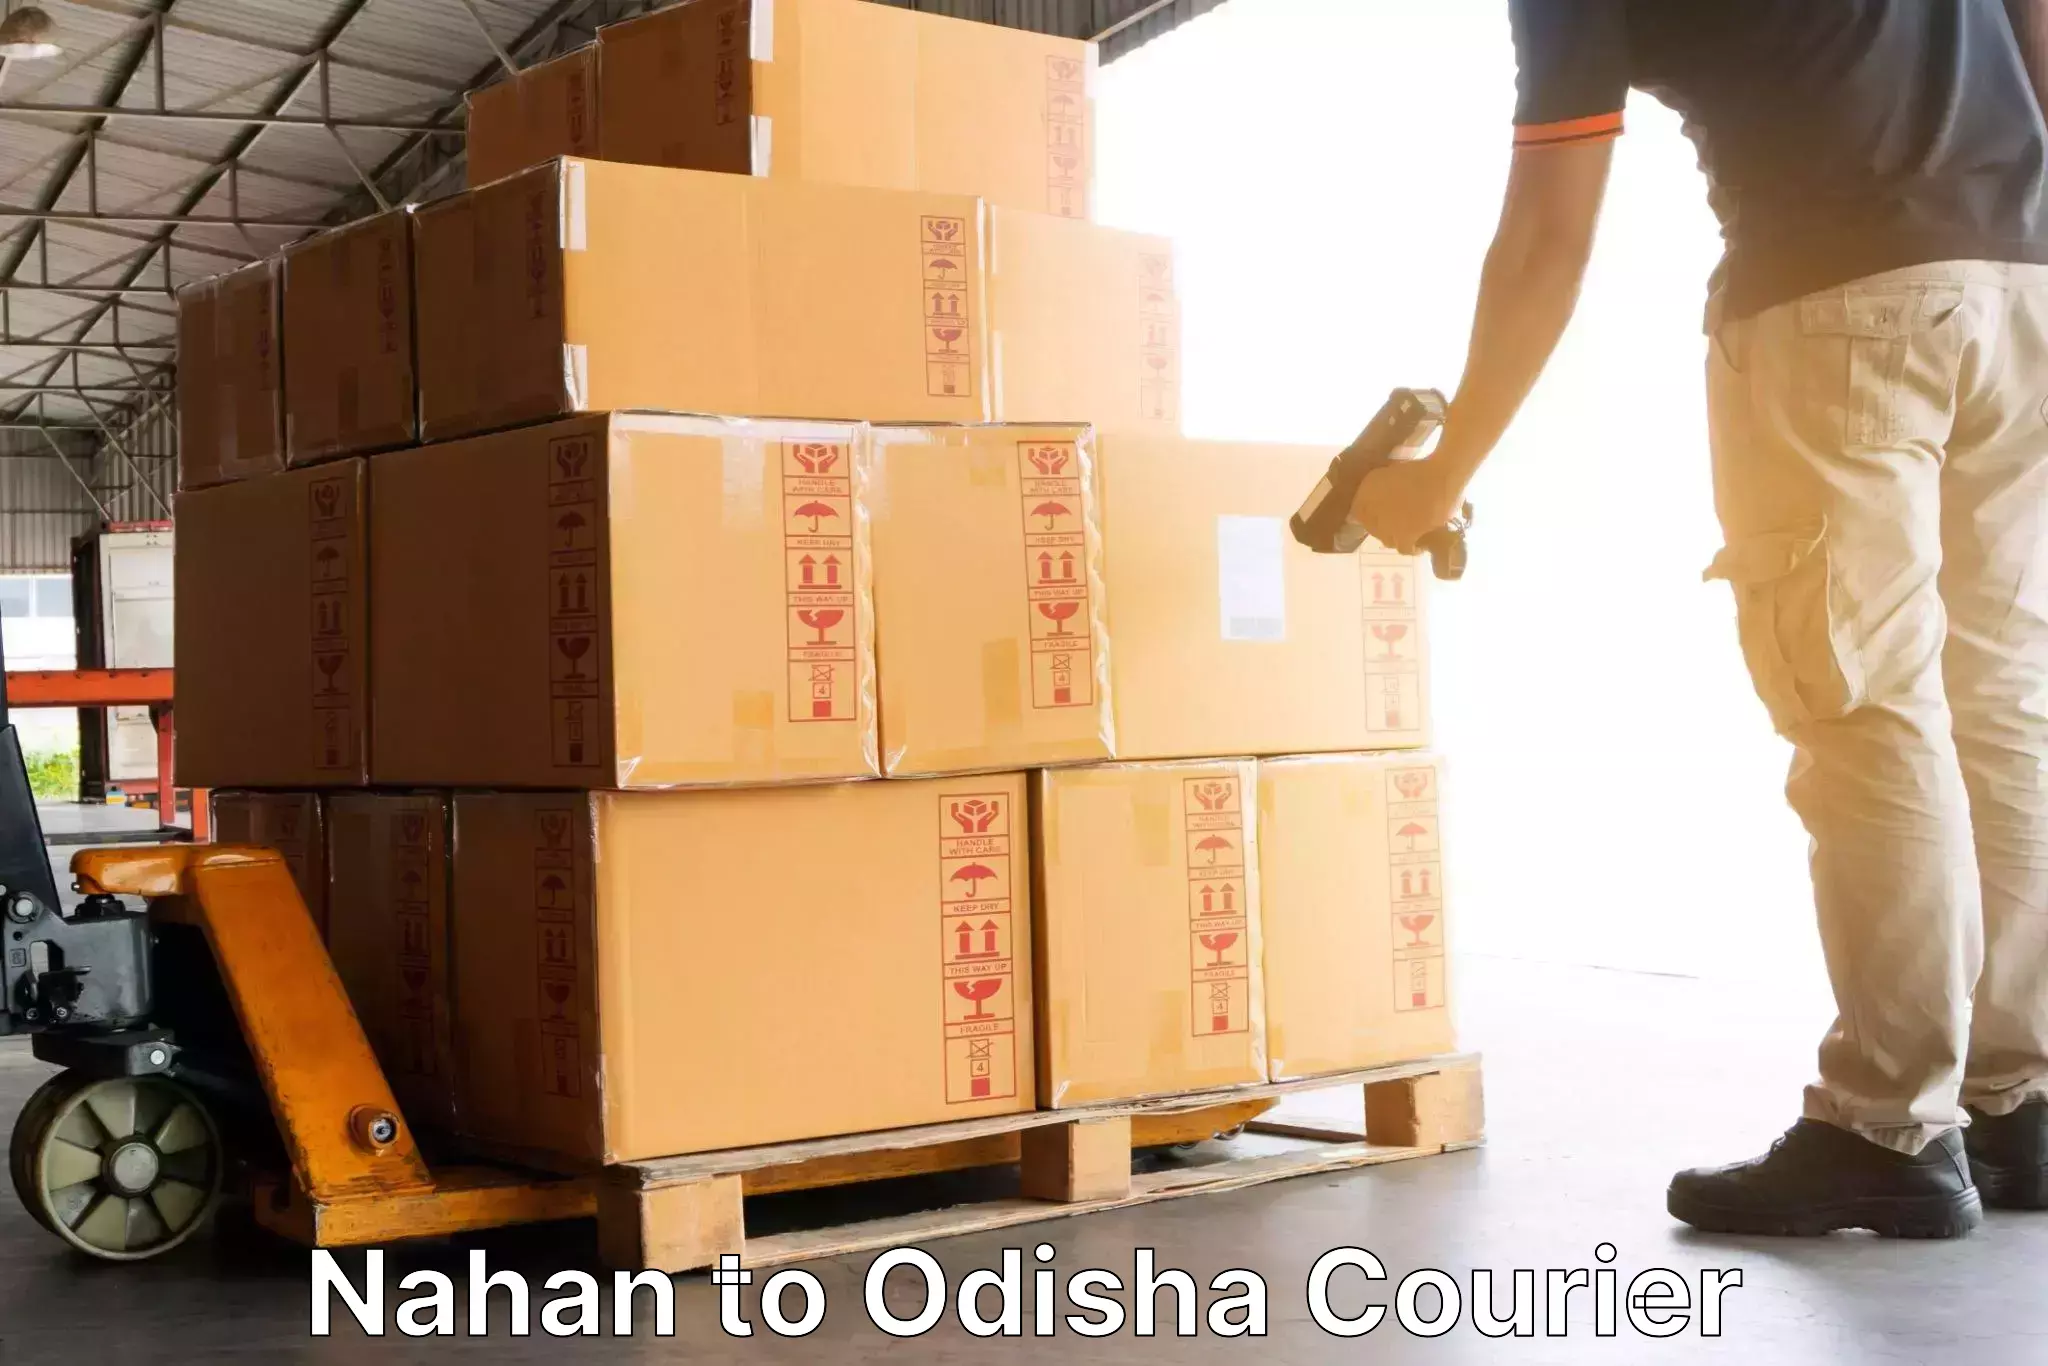 Global courier networks Nahan to Asika